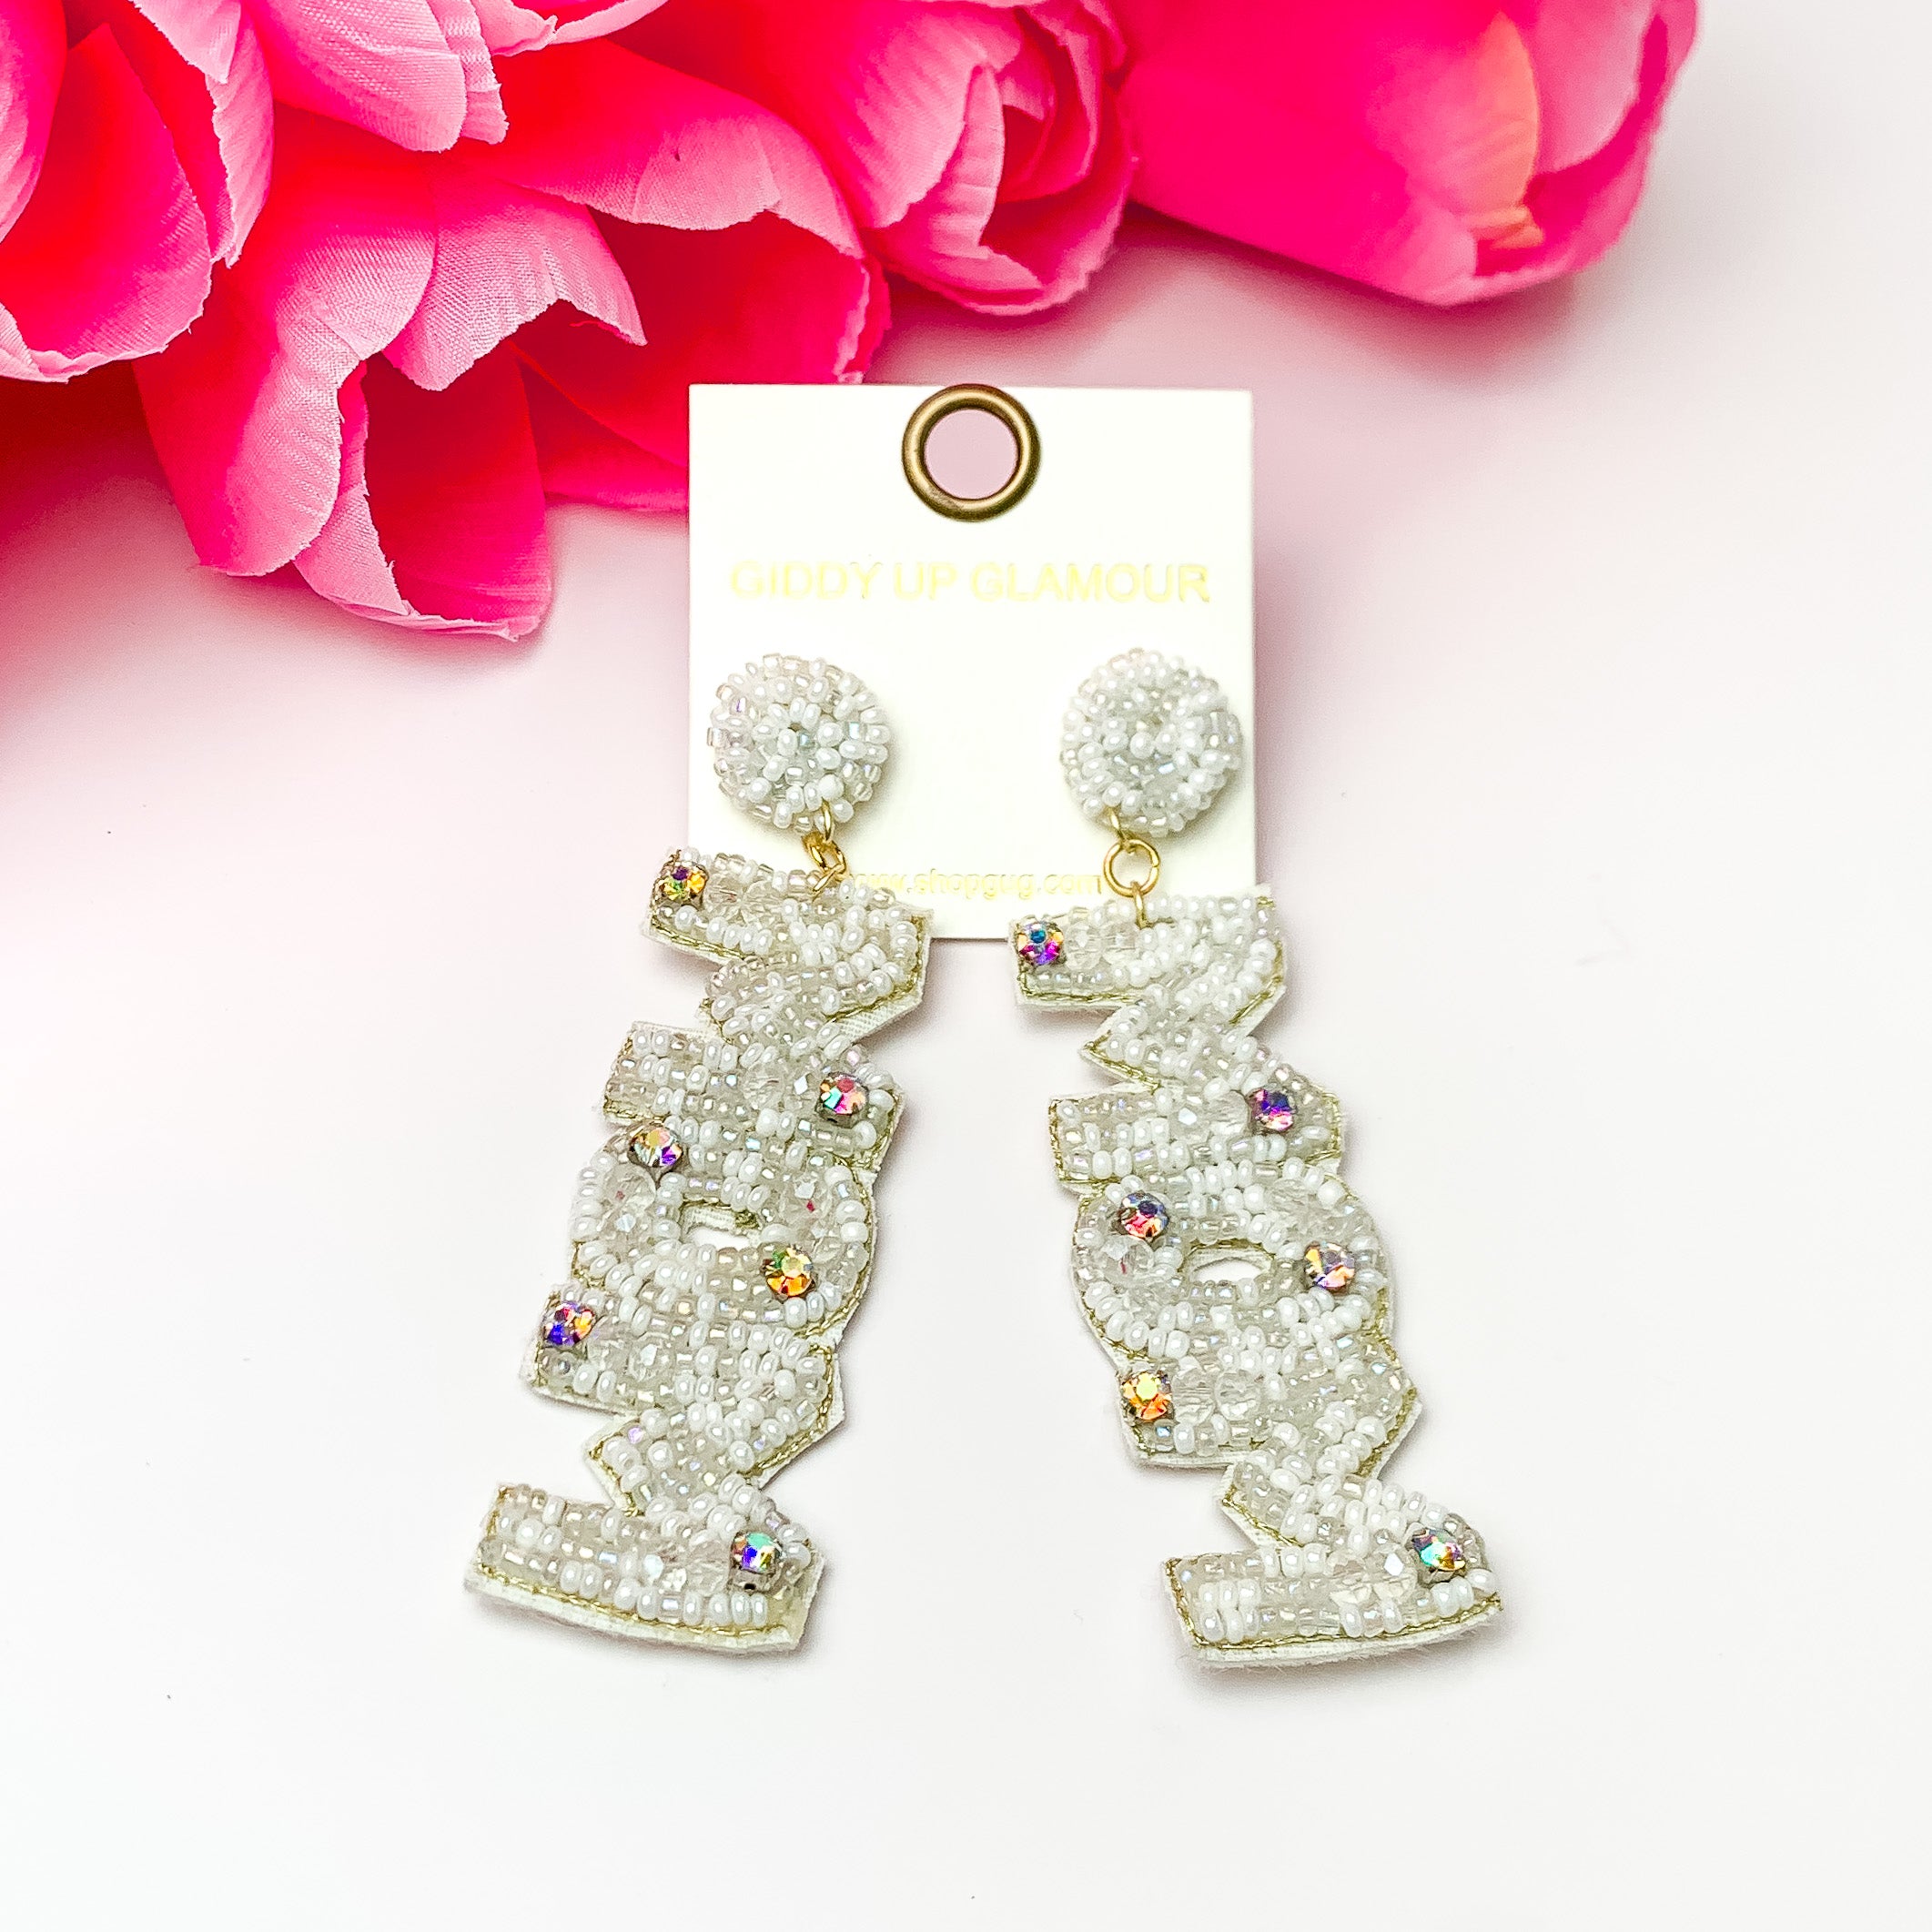 These earrings include white, circle, beaded post back earrings with a long dangle. This dangle spells out "MOM" in white beads with an inlay of ab crystals. These earrings are pictured on a white background with pink flowers.